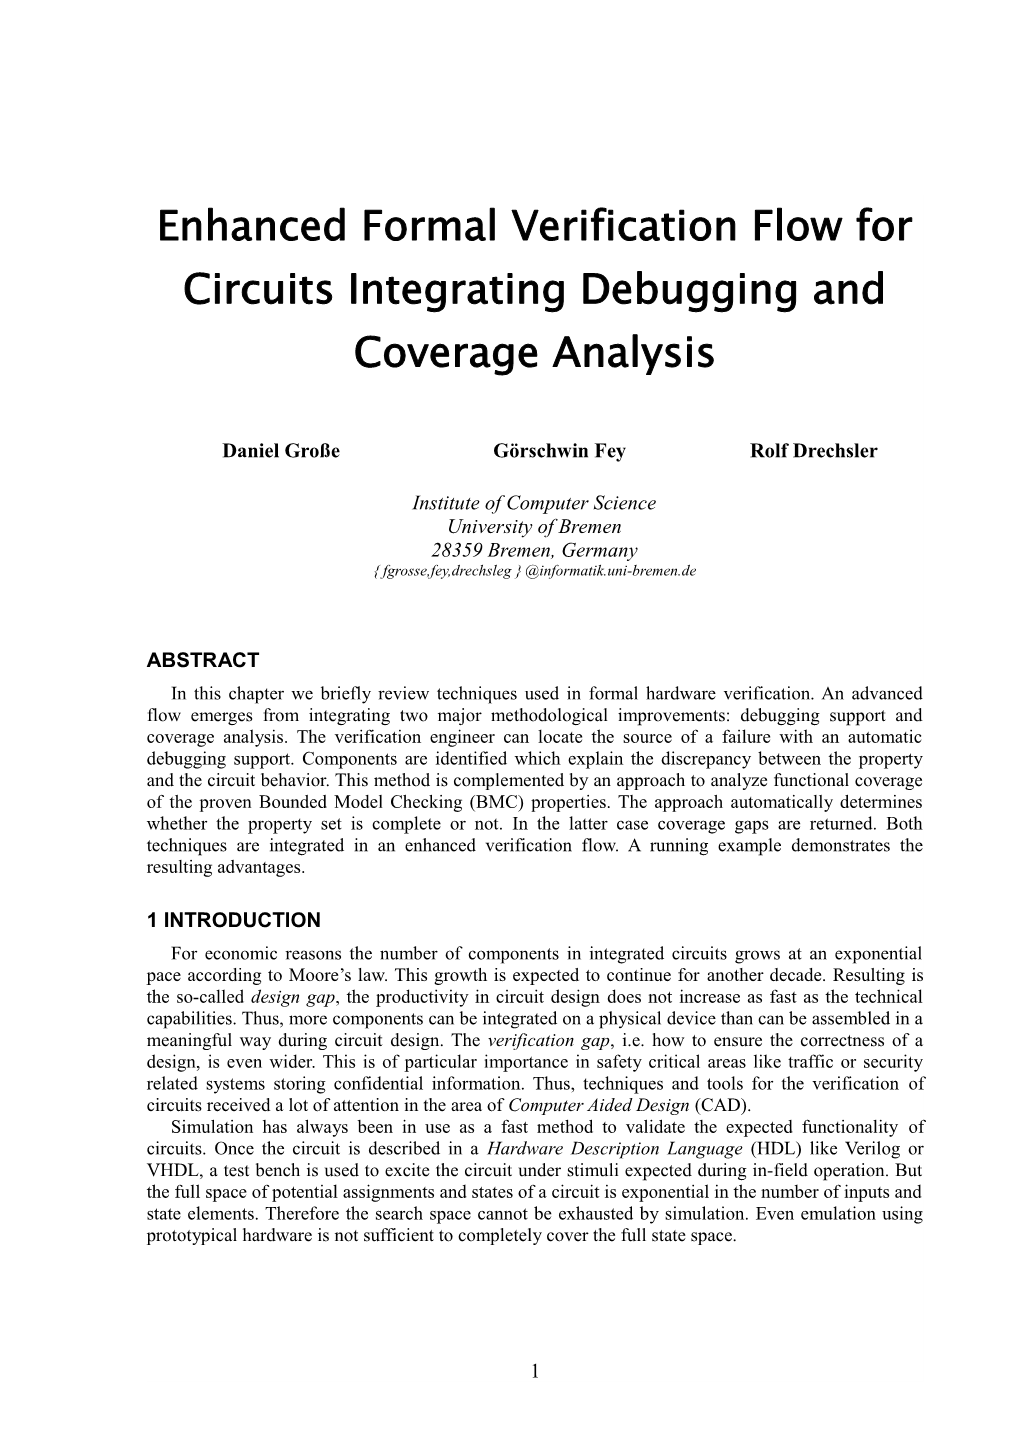 Enhanced Formal Verification Flow for Circuits Integrating Debugging and Coverage Analysis